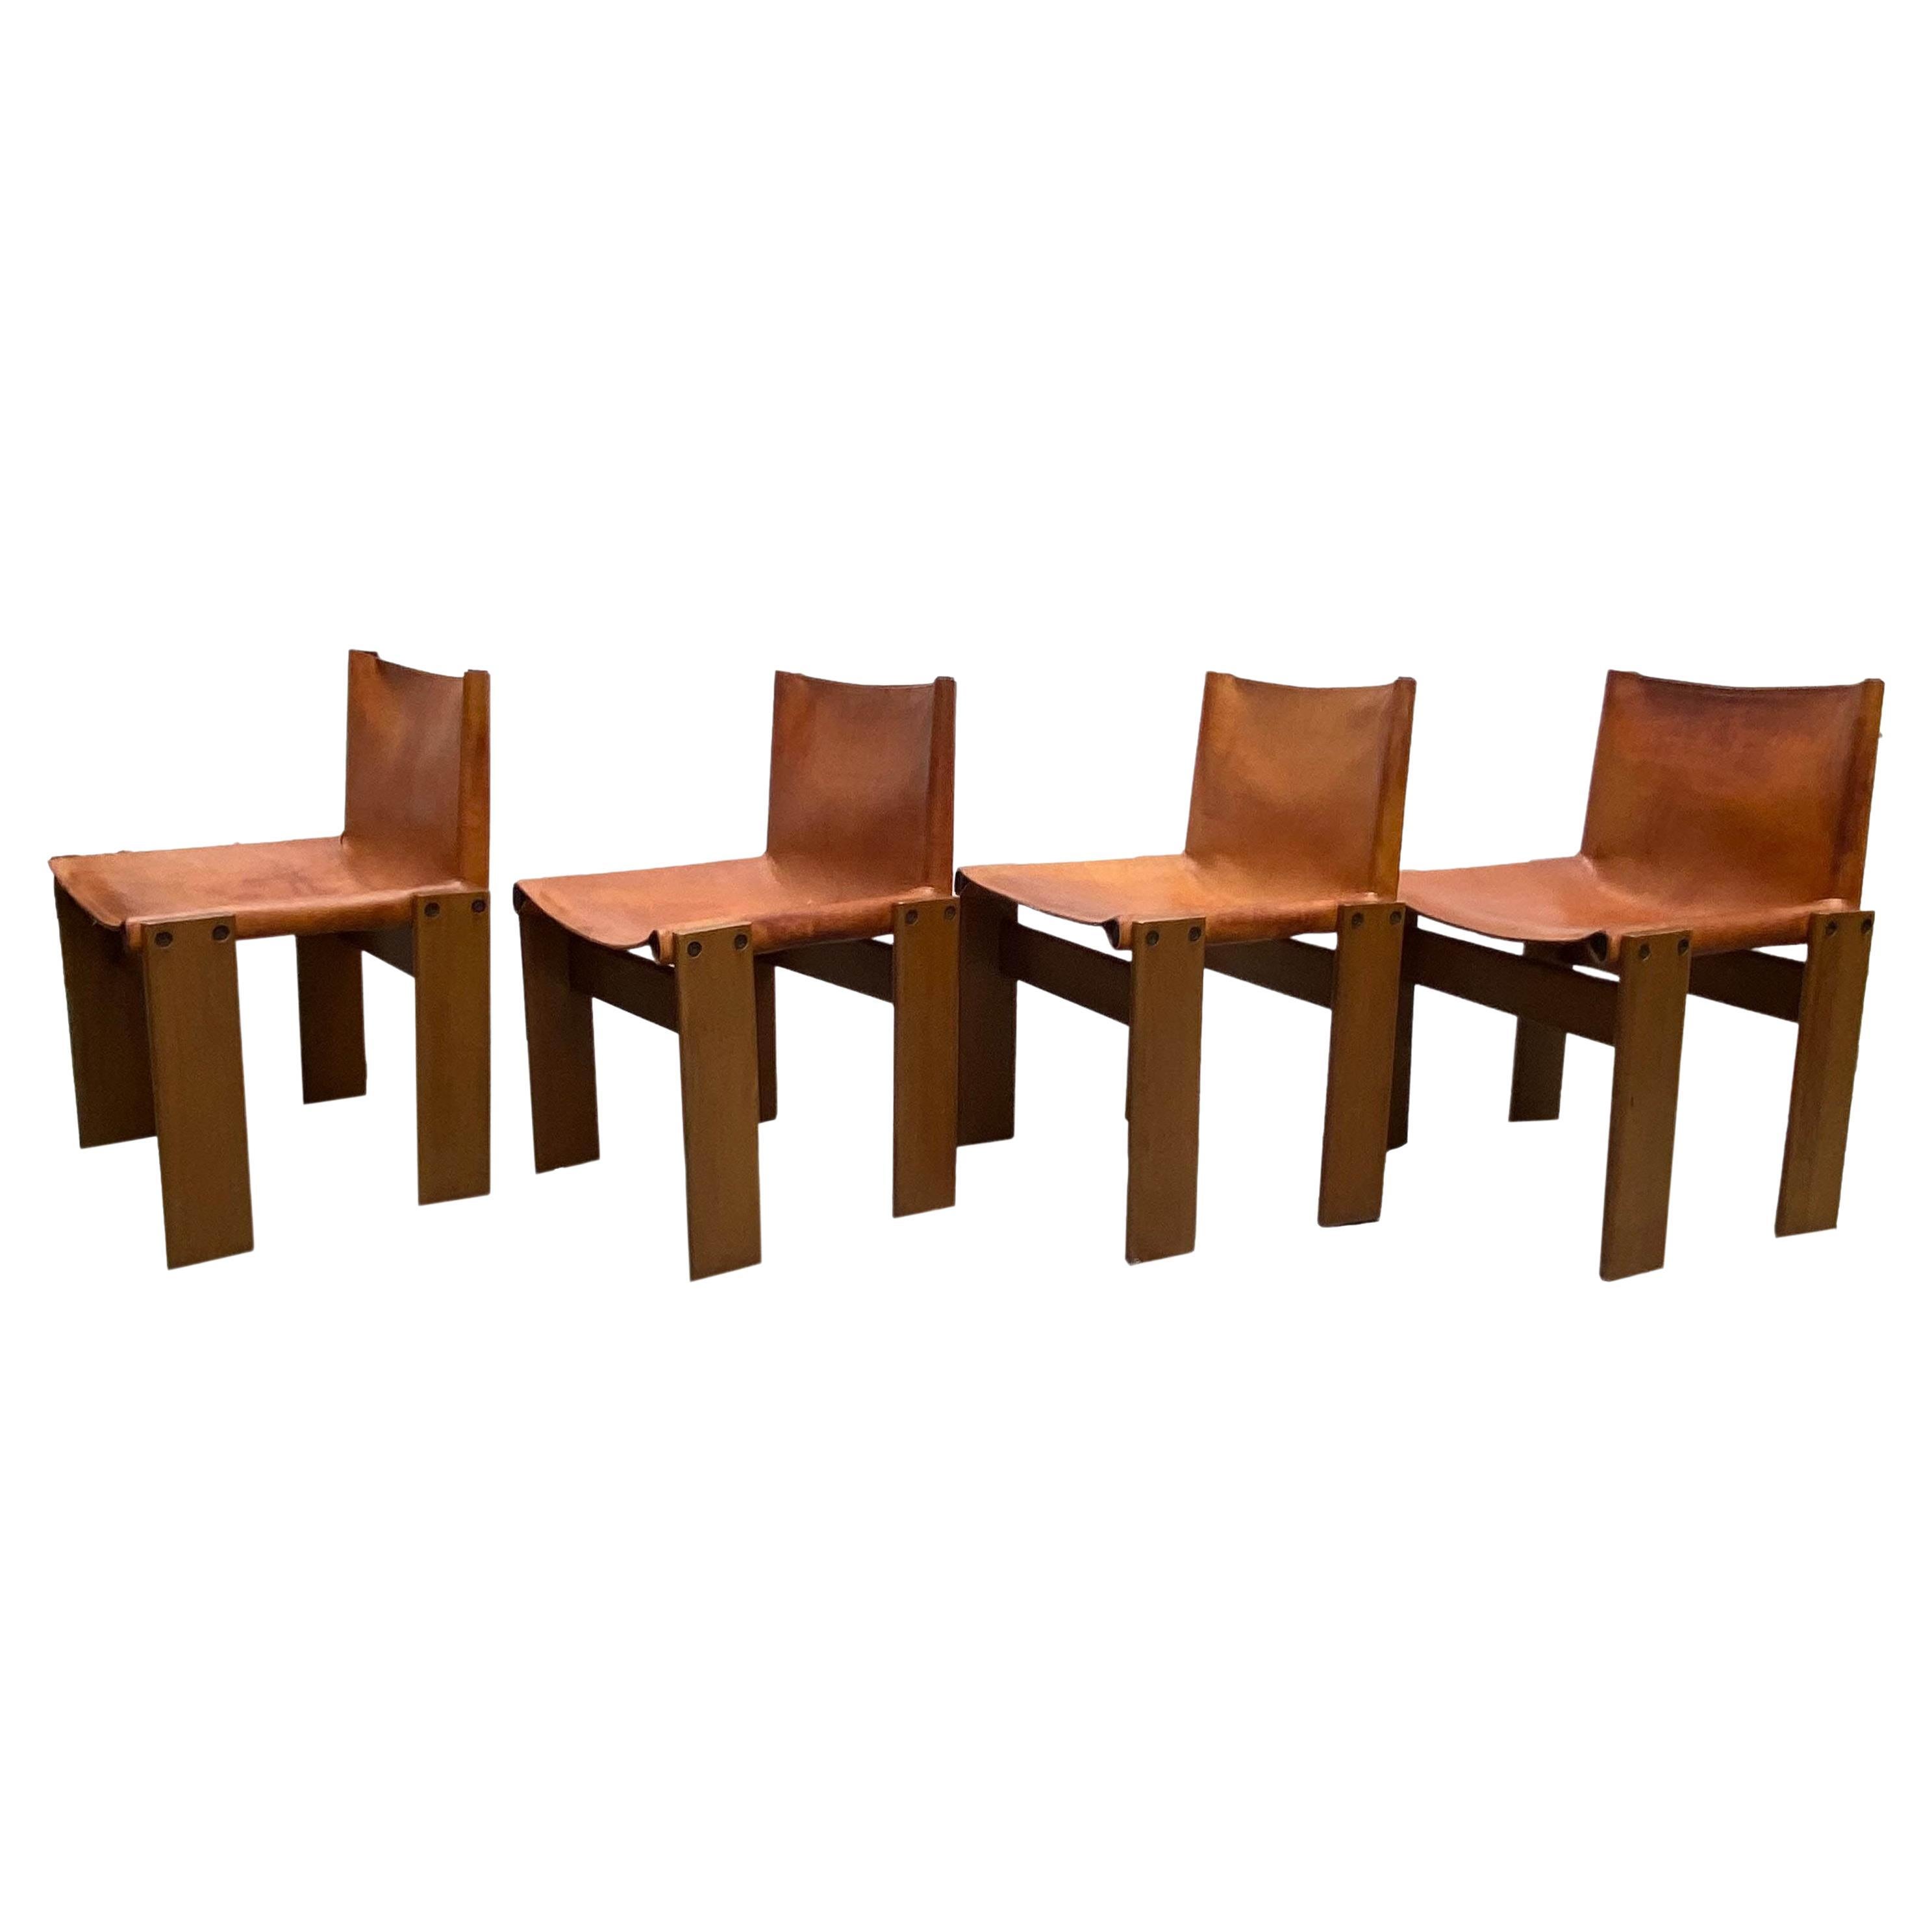 Afra & Tobia  Scarpa for Molteni "Monk" Chairs, Set of 4, Italy 1970s